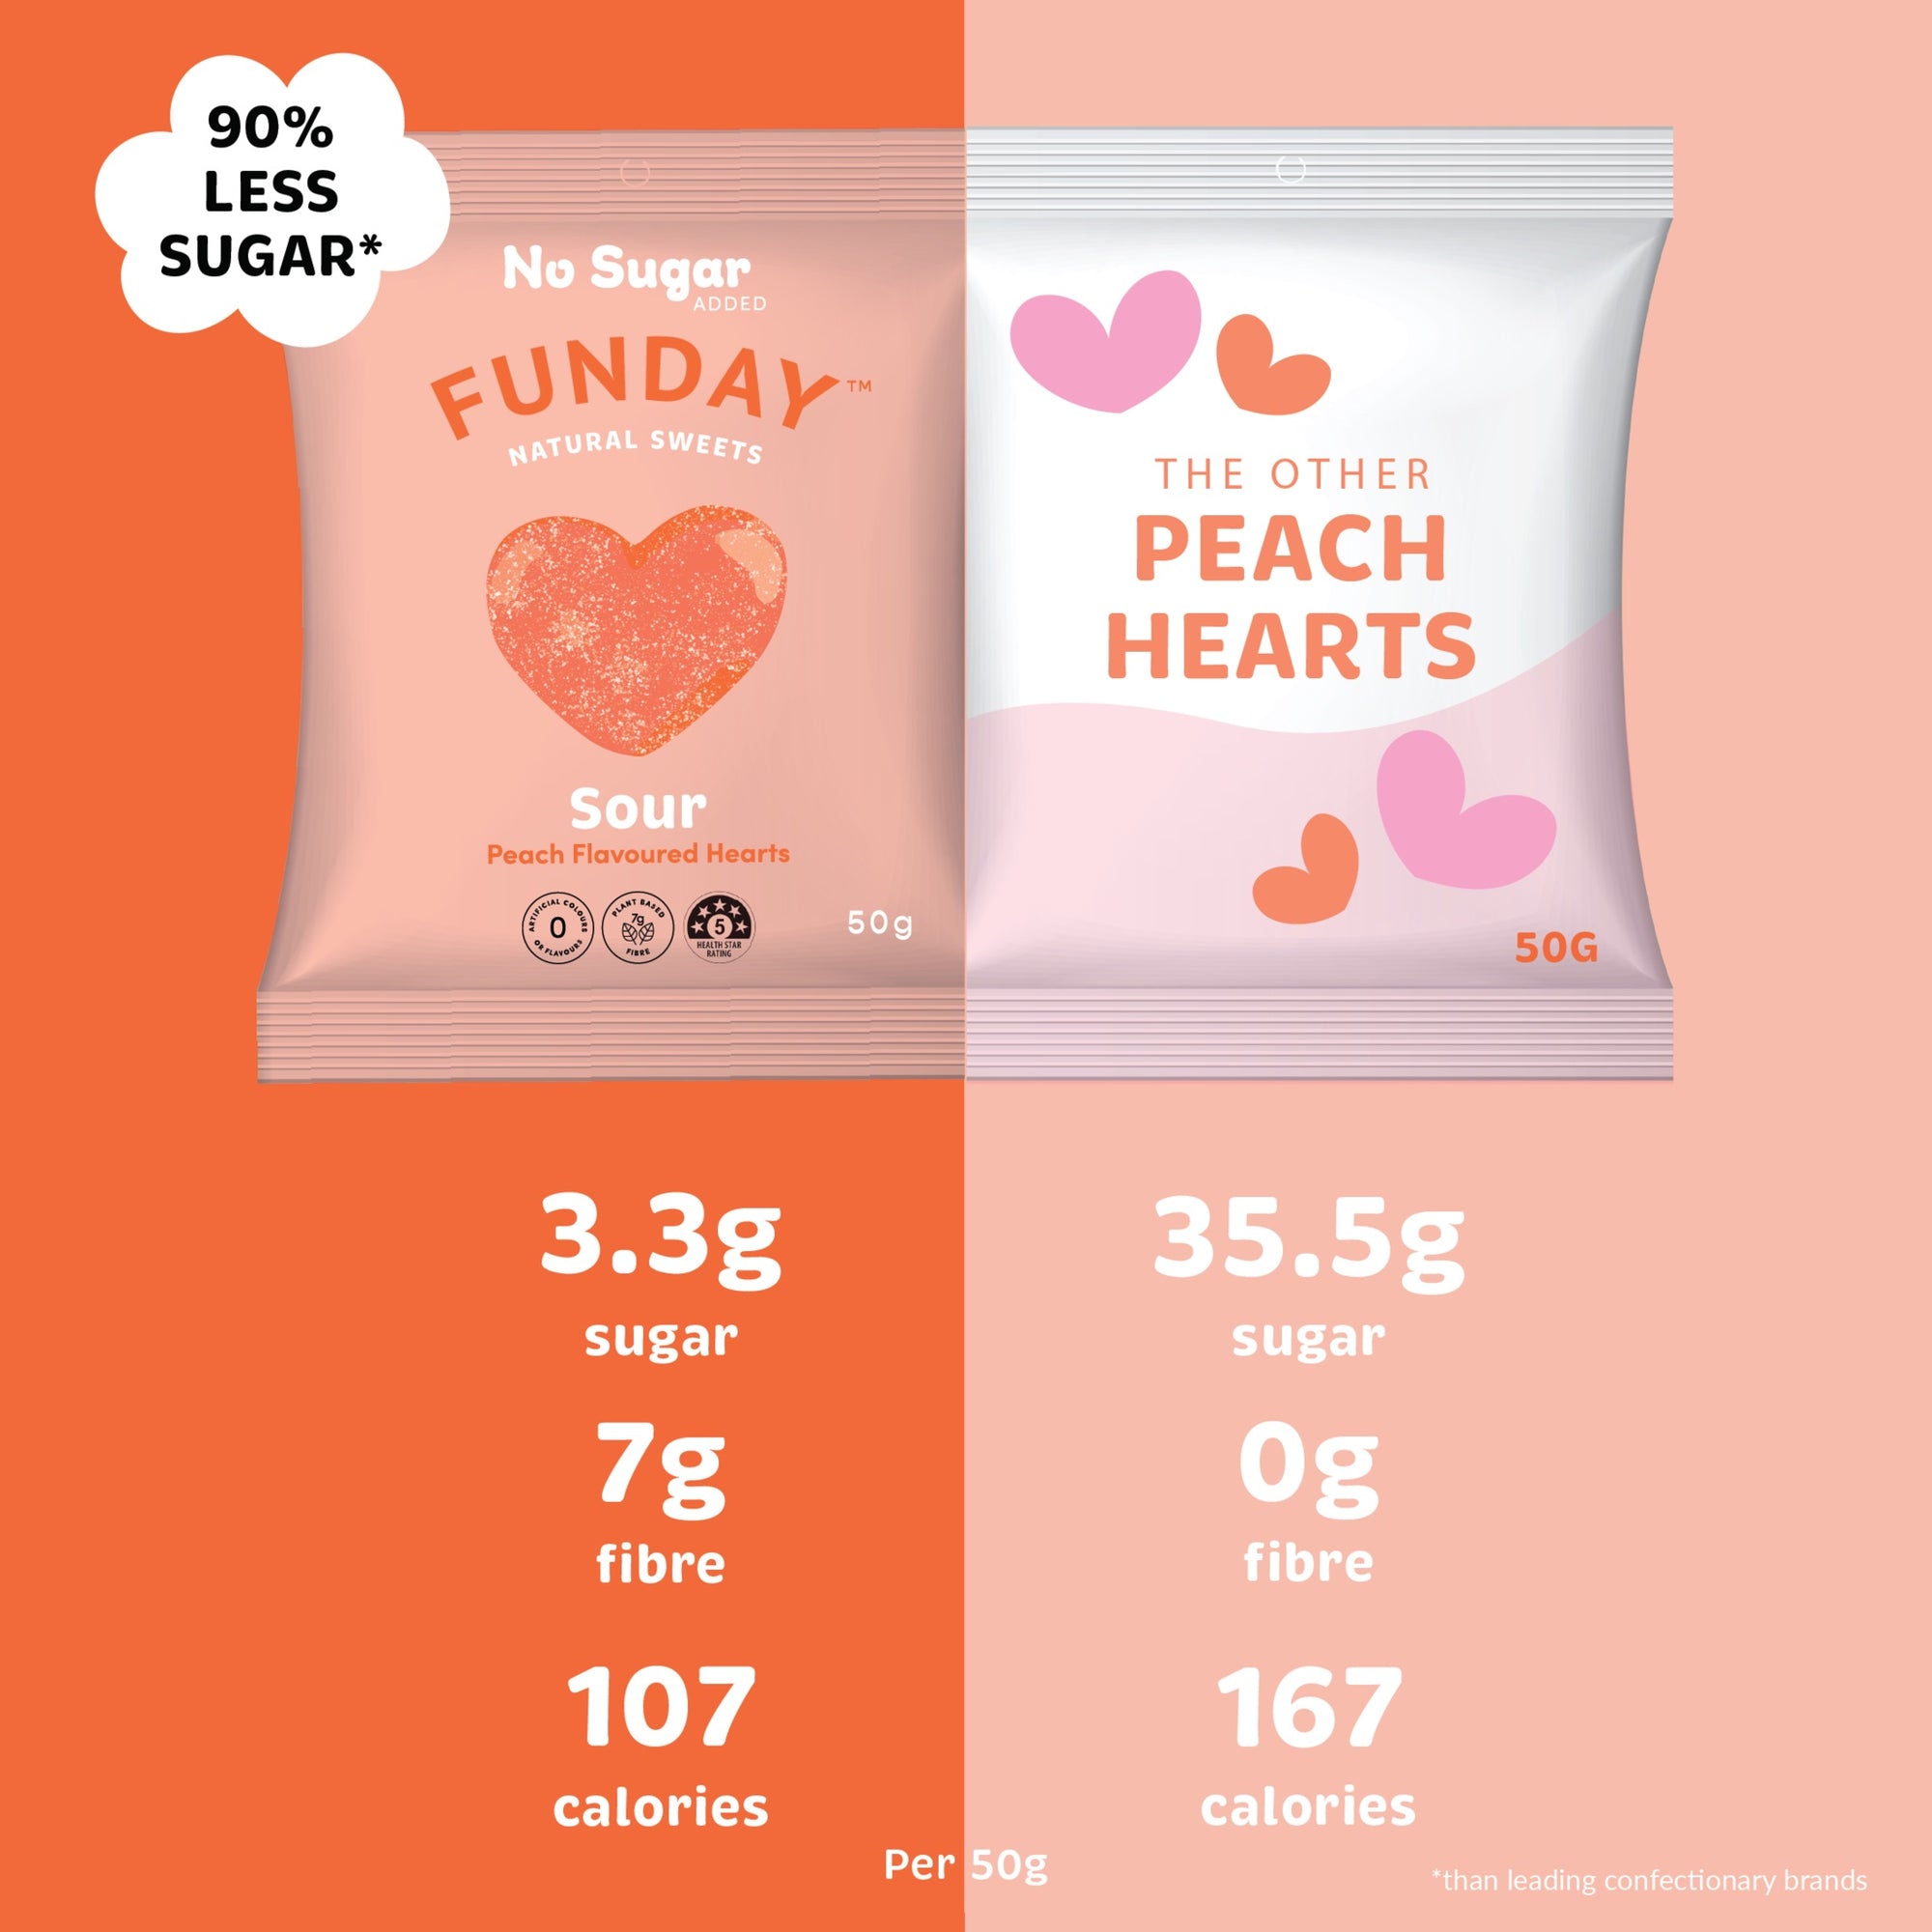 Sour Peach Hearts 50g (12 BAGS IN EVERY BOX)